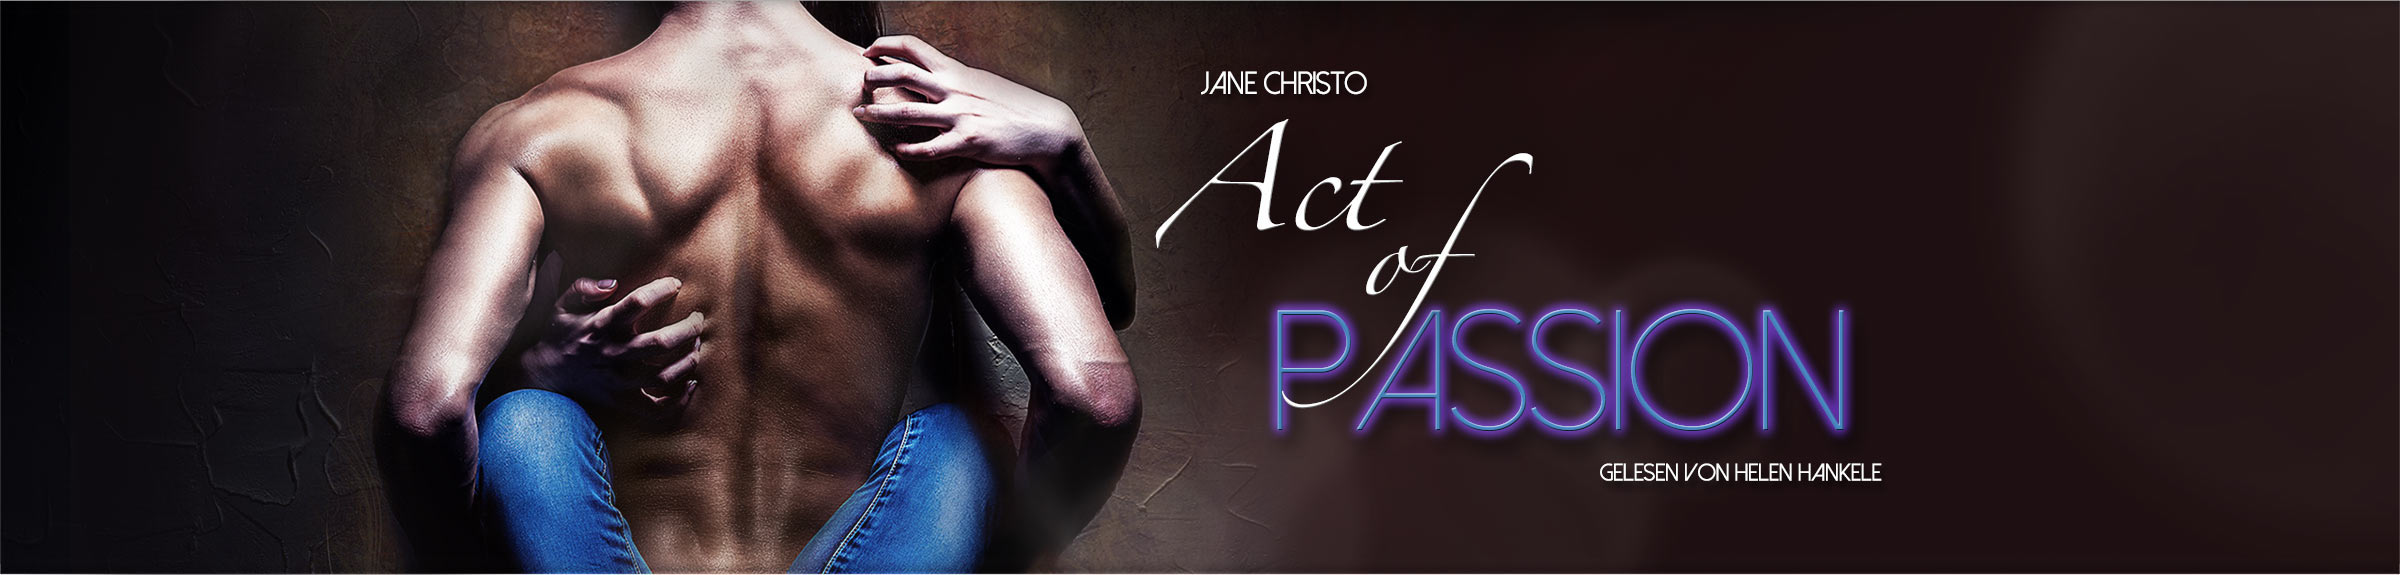 Act of Passion